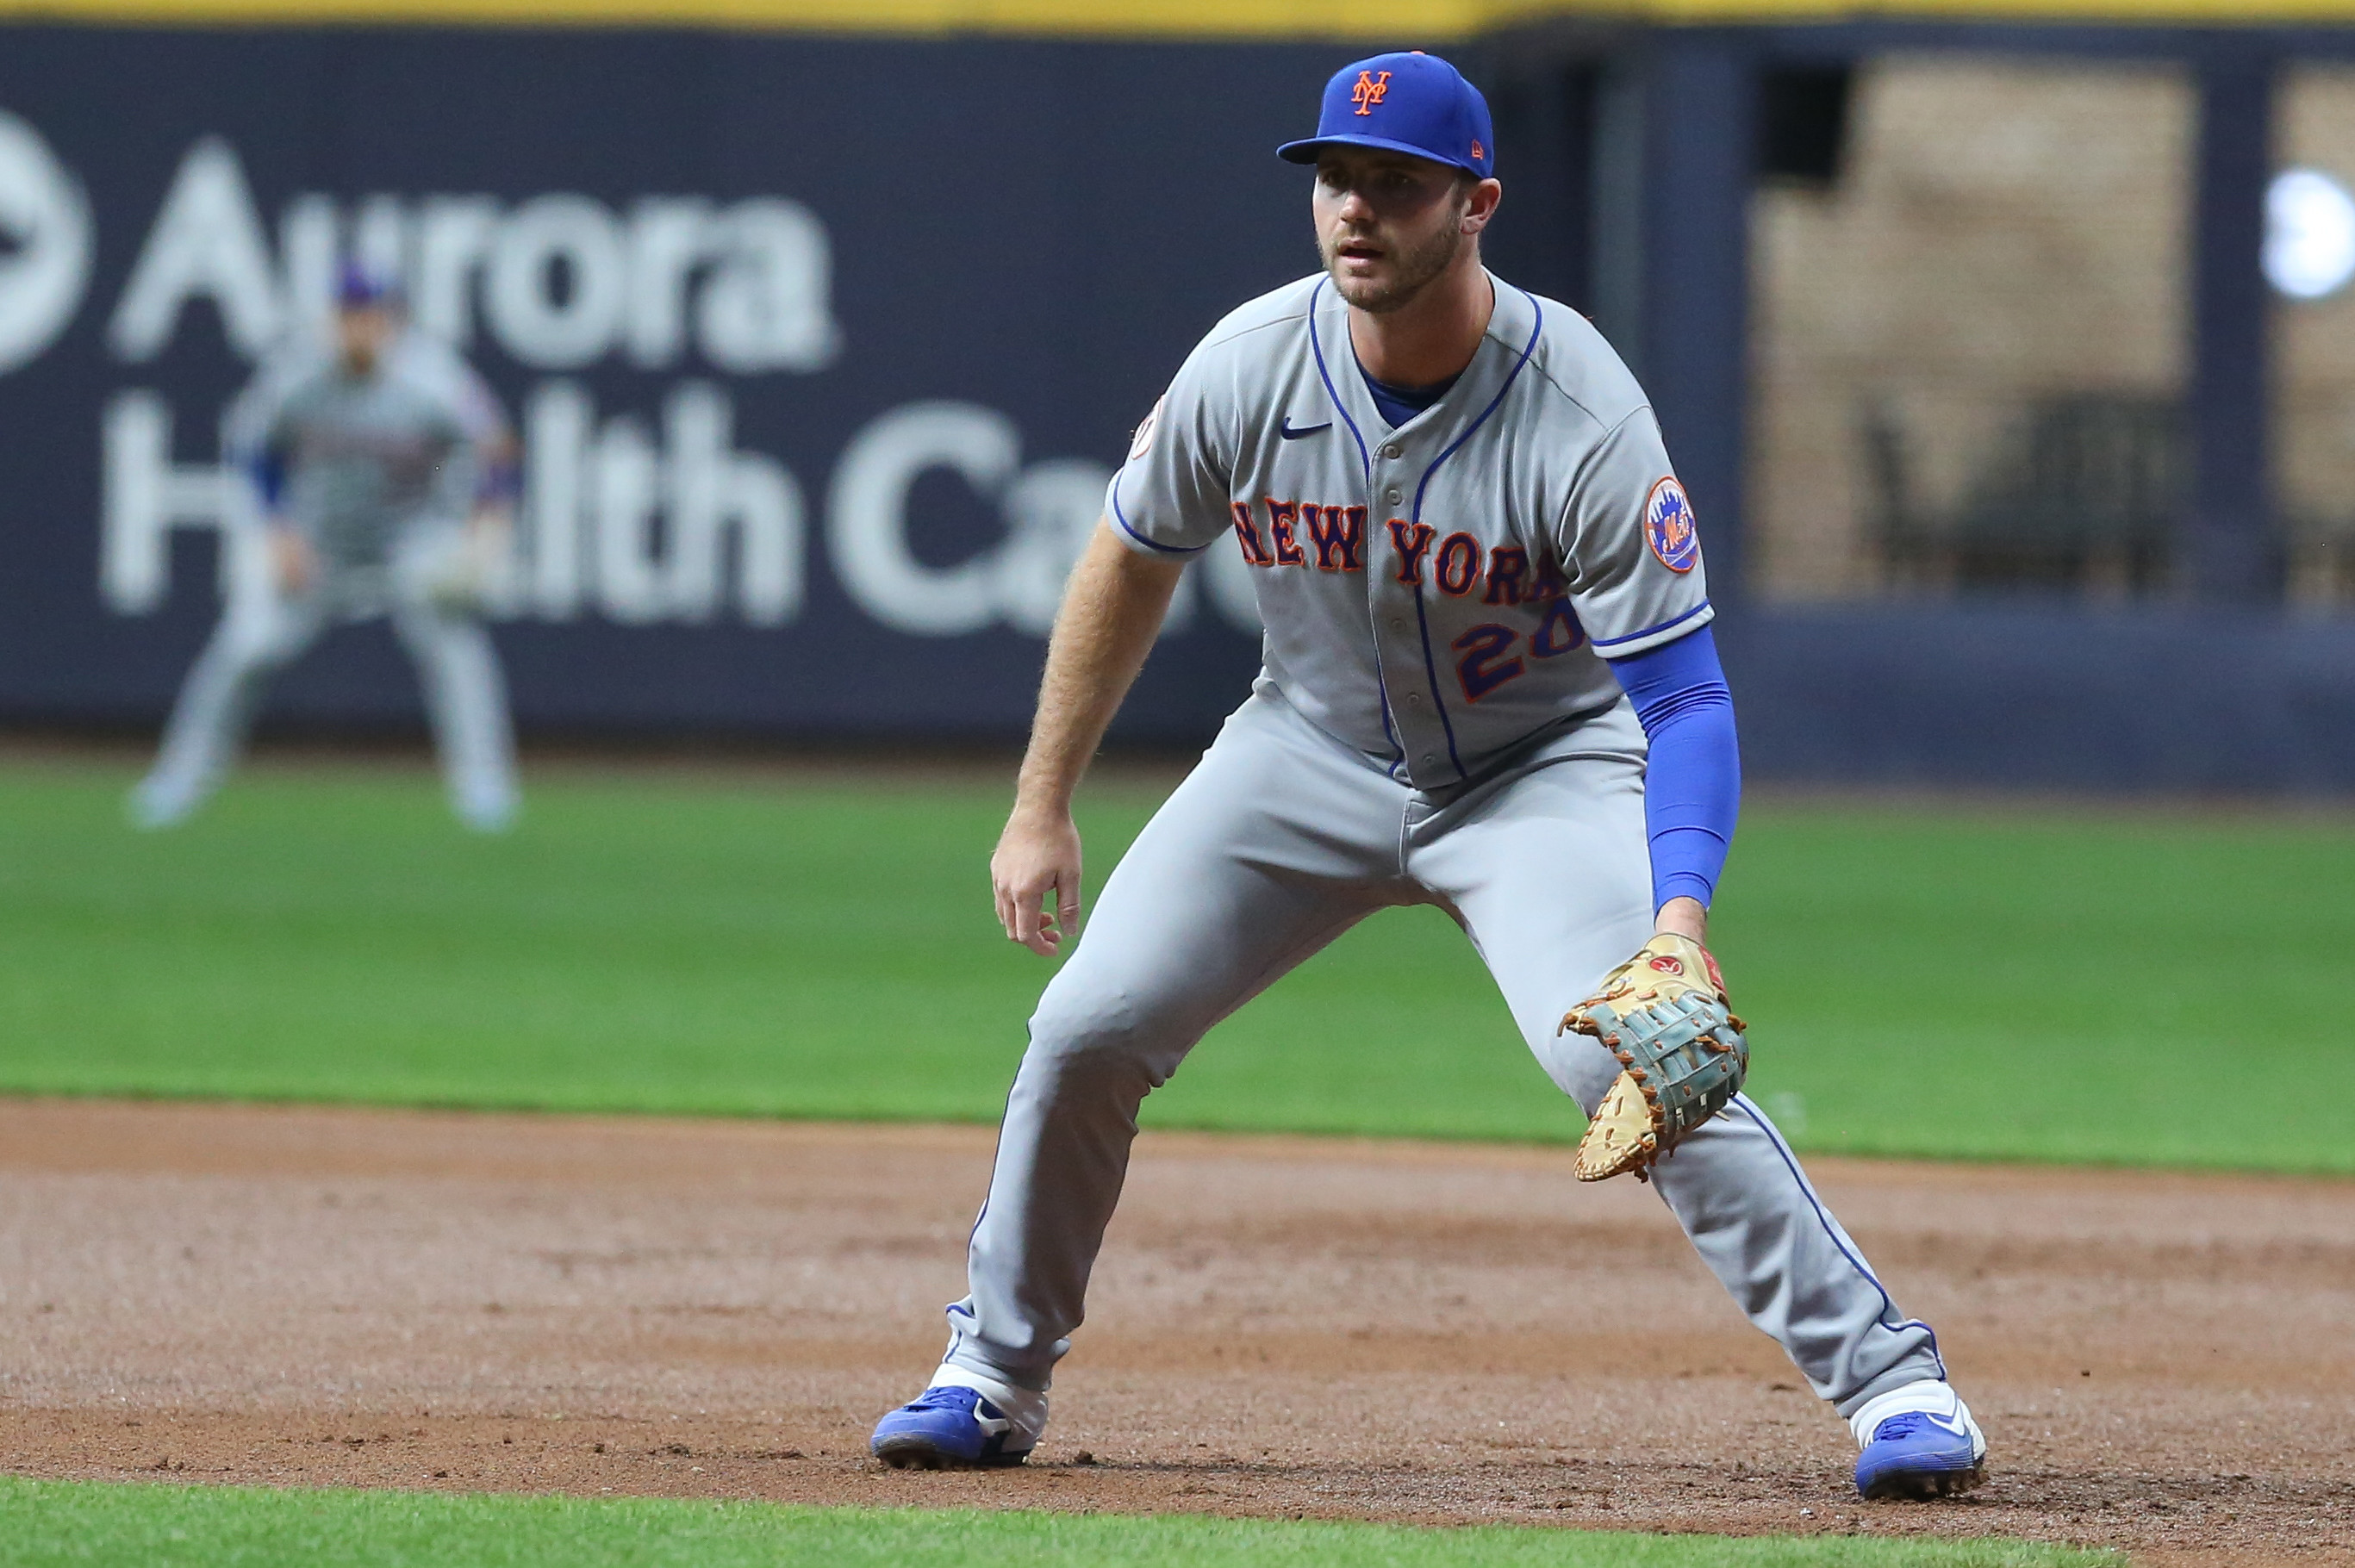 Pete Alonso, Mets Reportedly Agree to 1-Year, $7.4M Contract to